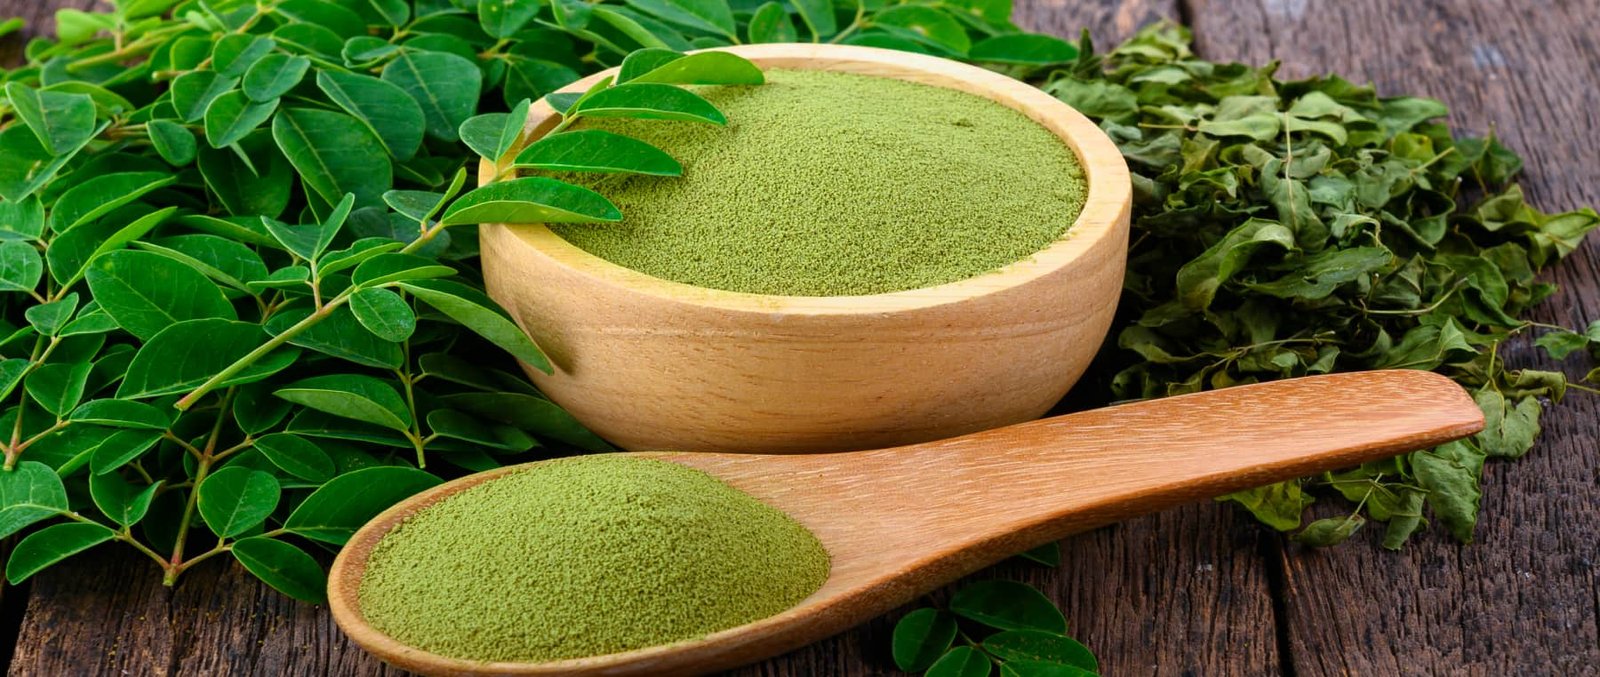 3-different-ways-moringa-powder-can-assist-you-with-controlling-your-glucose-levels